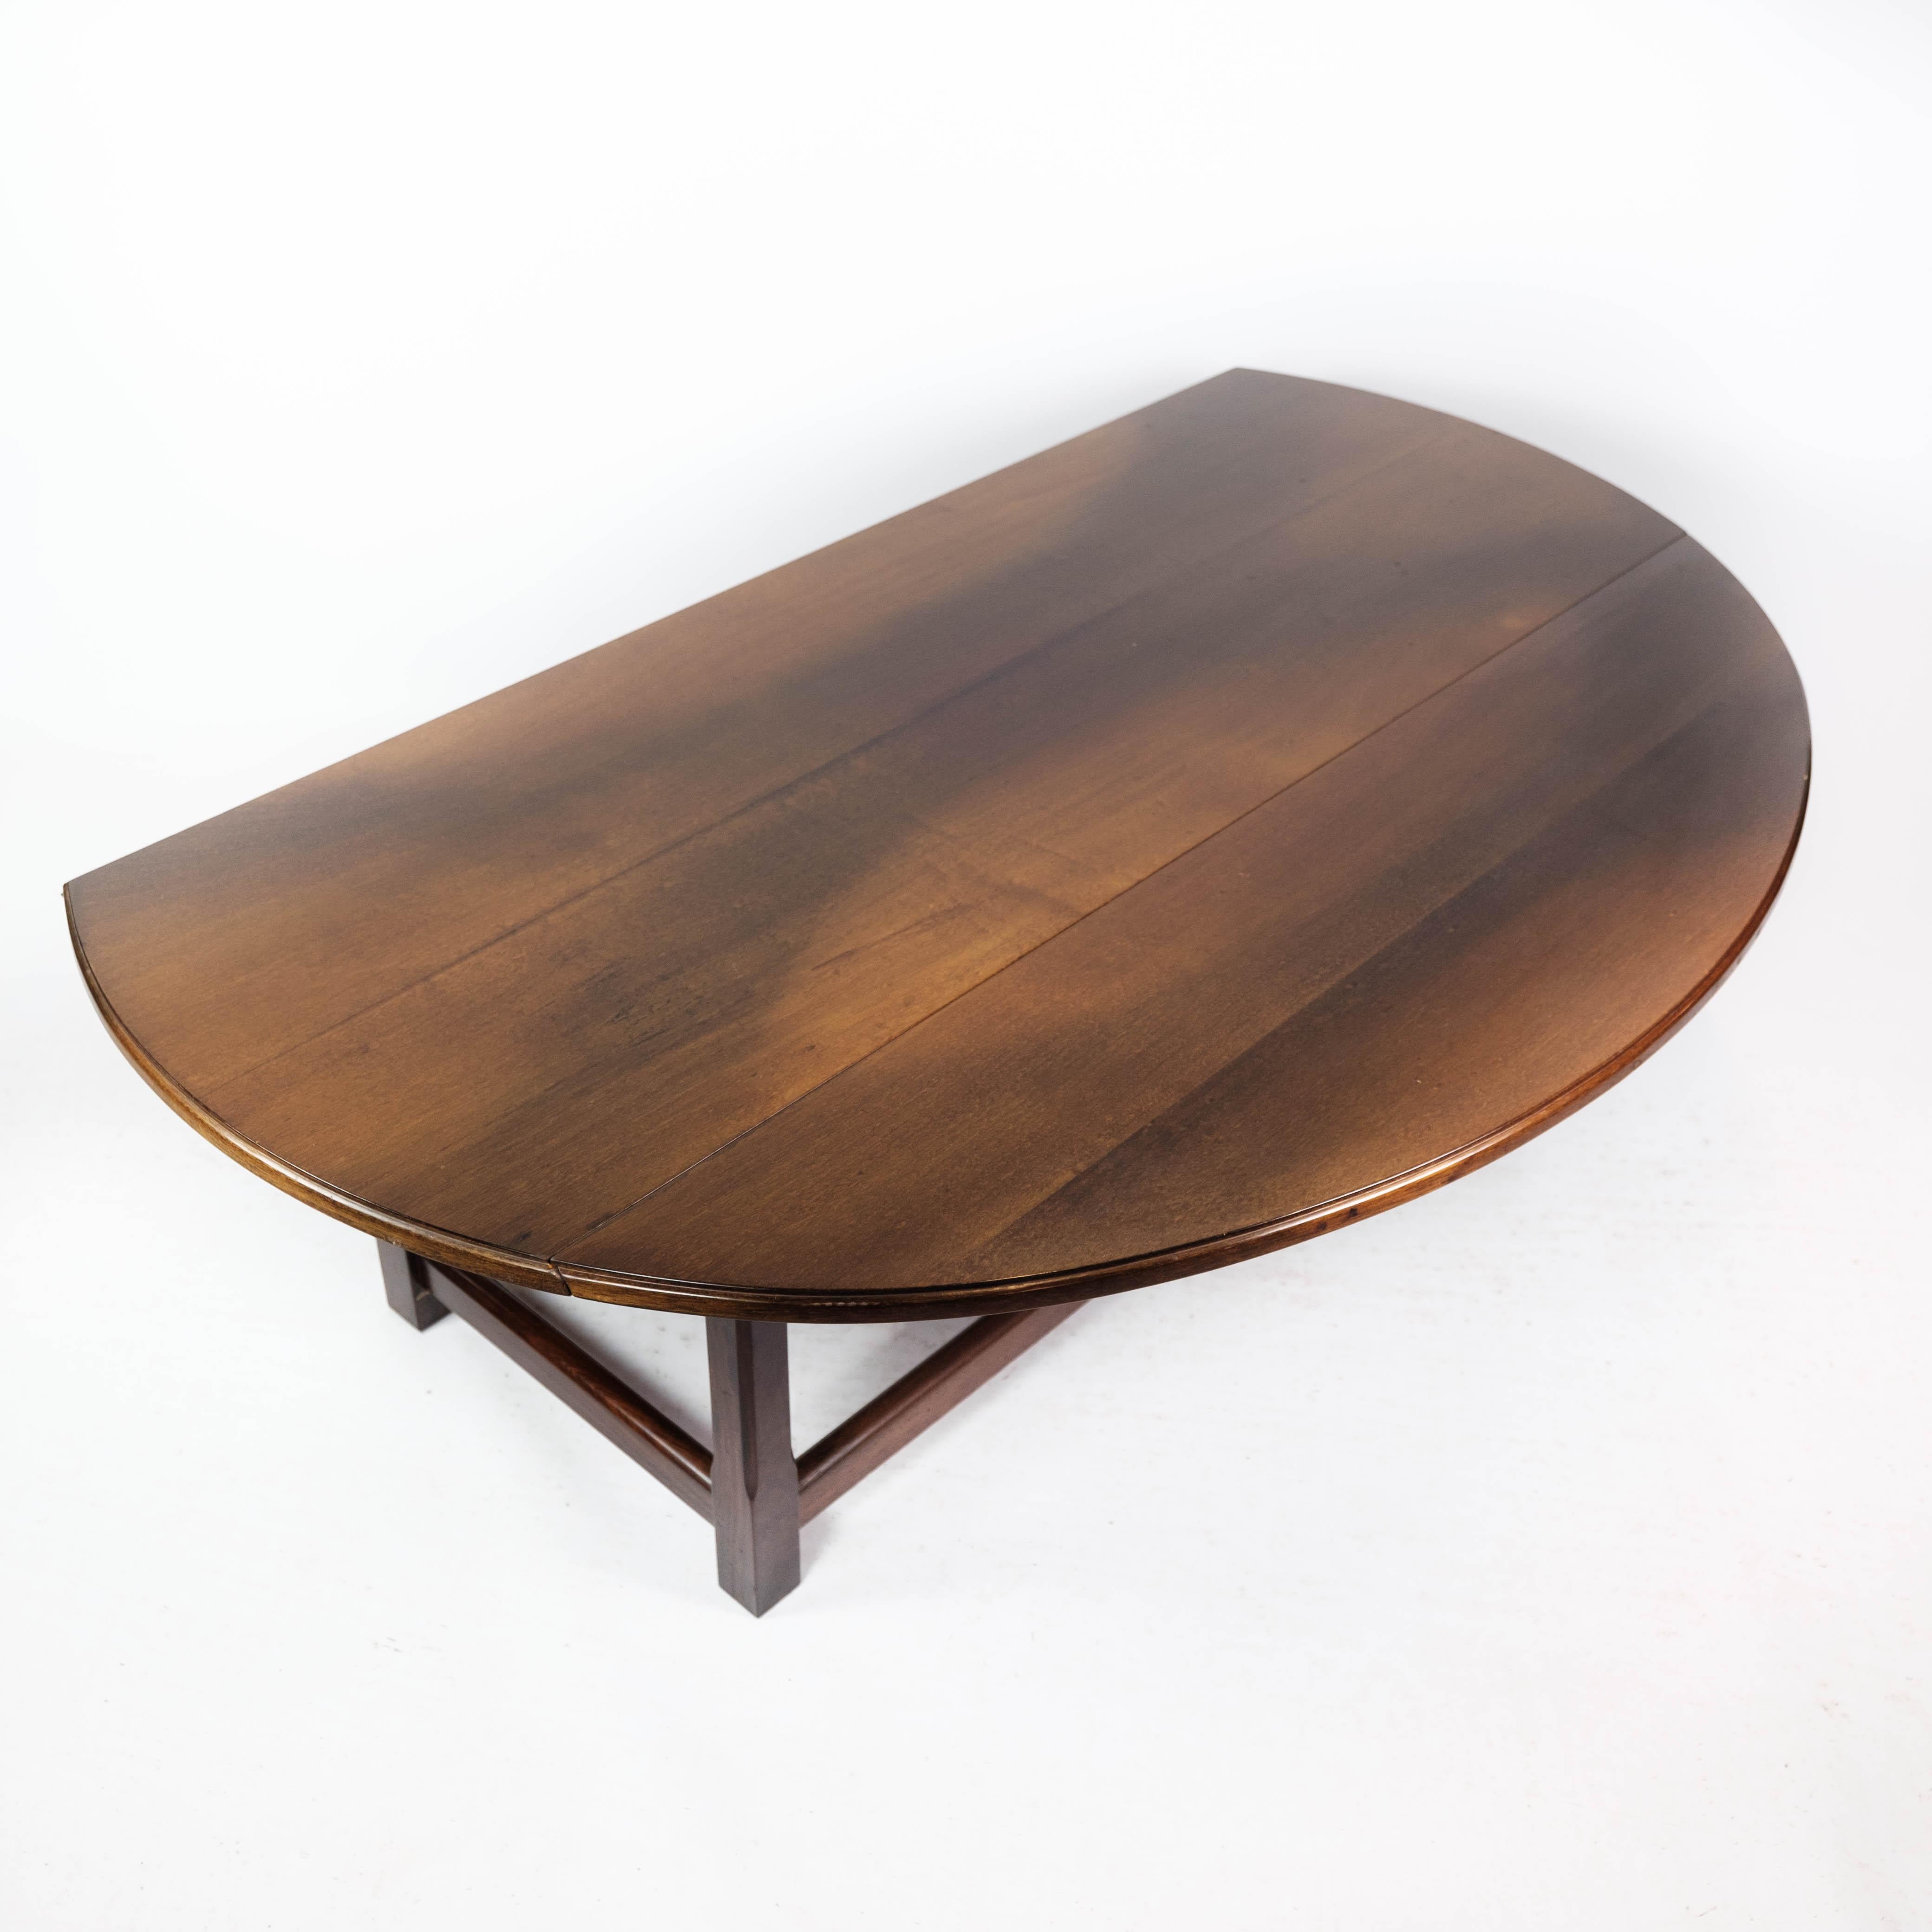 Mid-20th Century Coffee Table Made In Mahogany With Extentions From 1930s For Sale